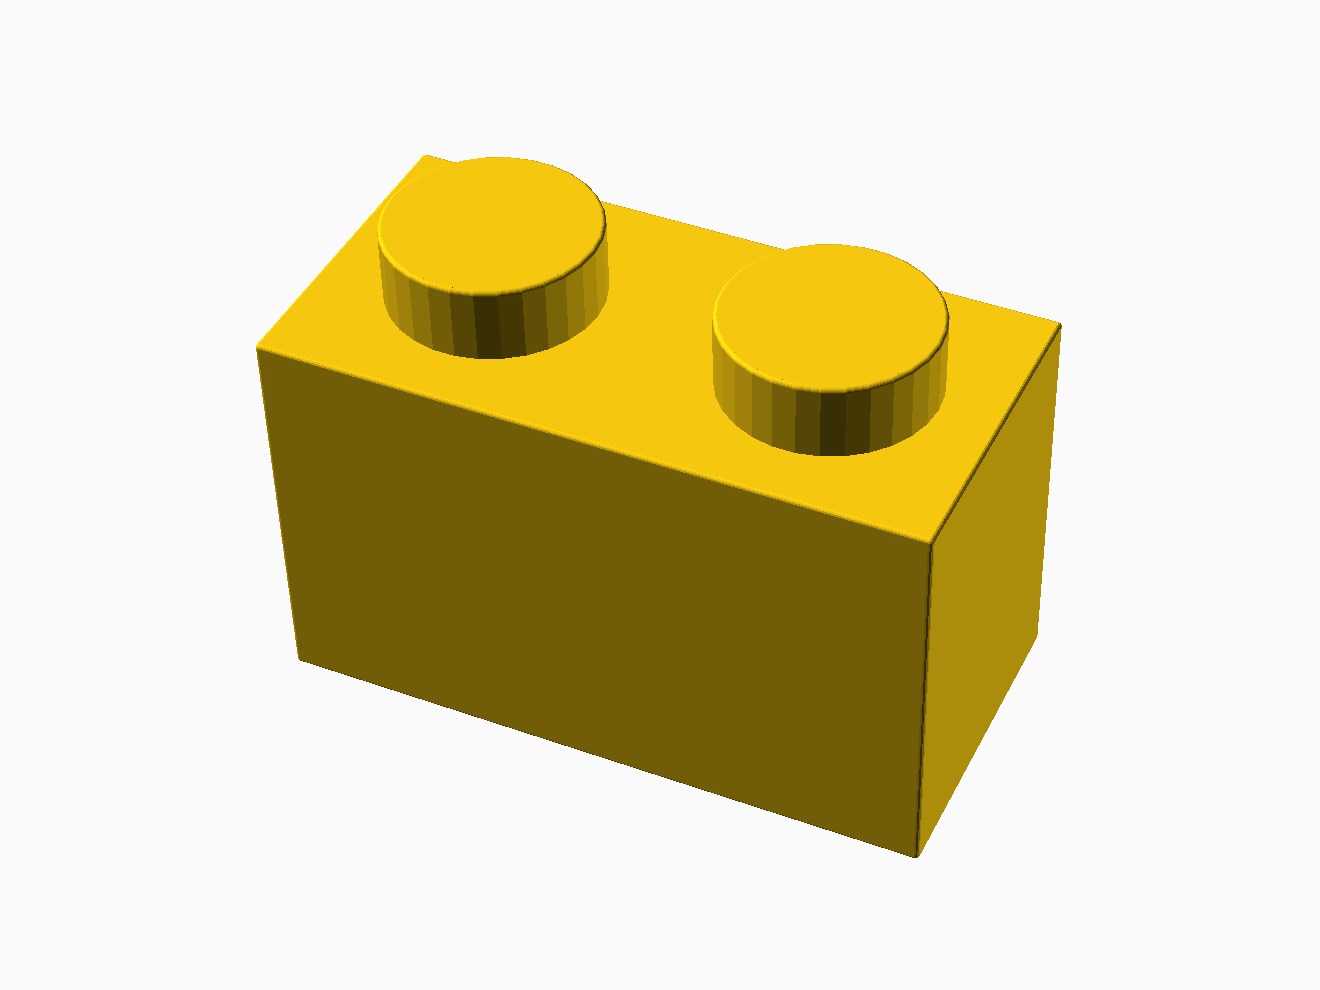 3D printable model of a LEGO 2x1 Brick with standard knobs.